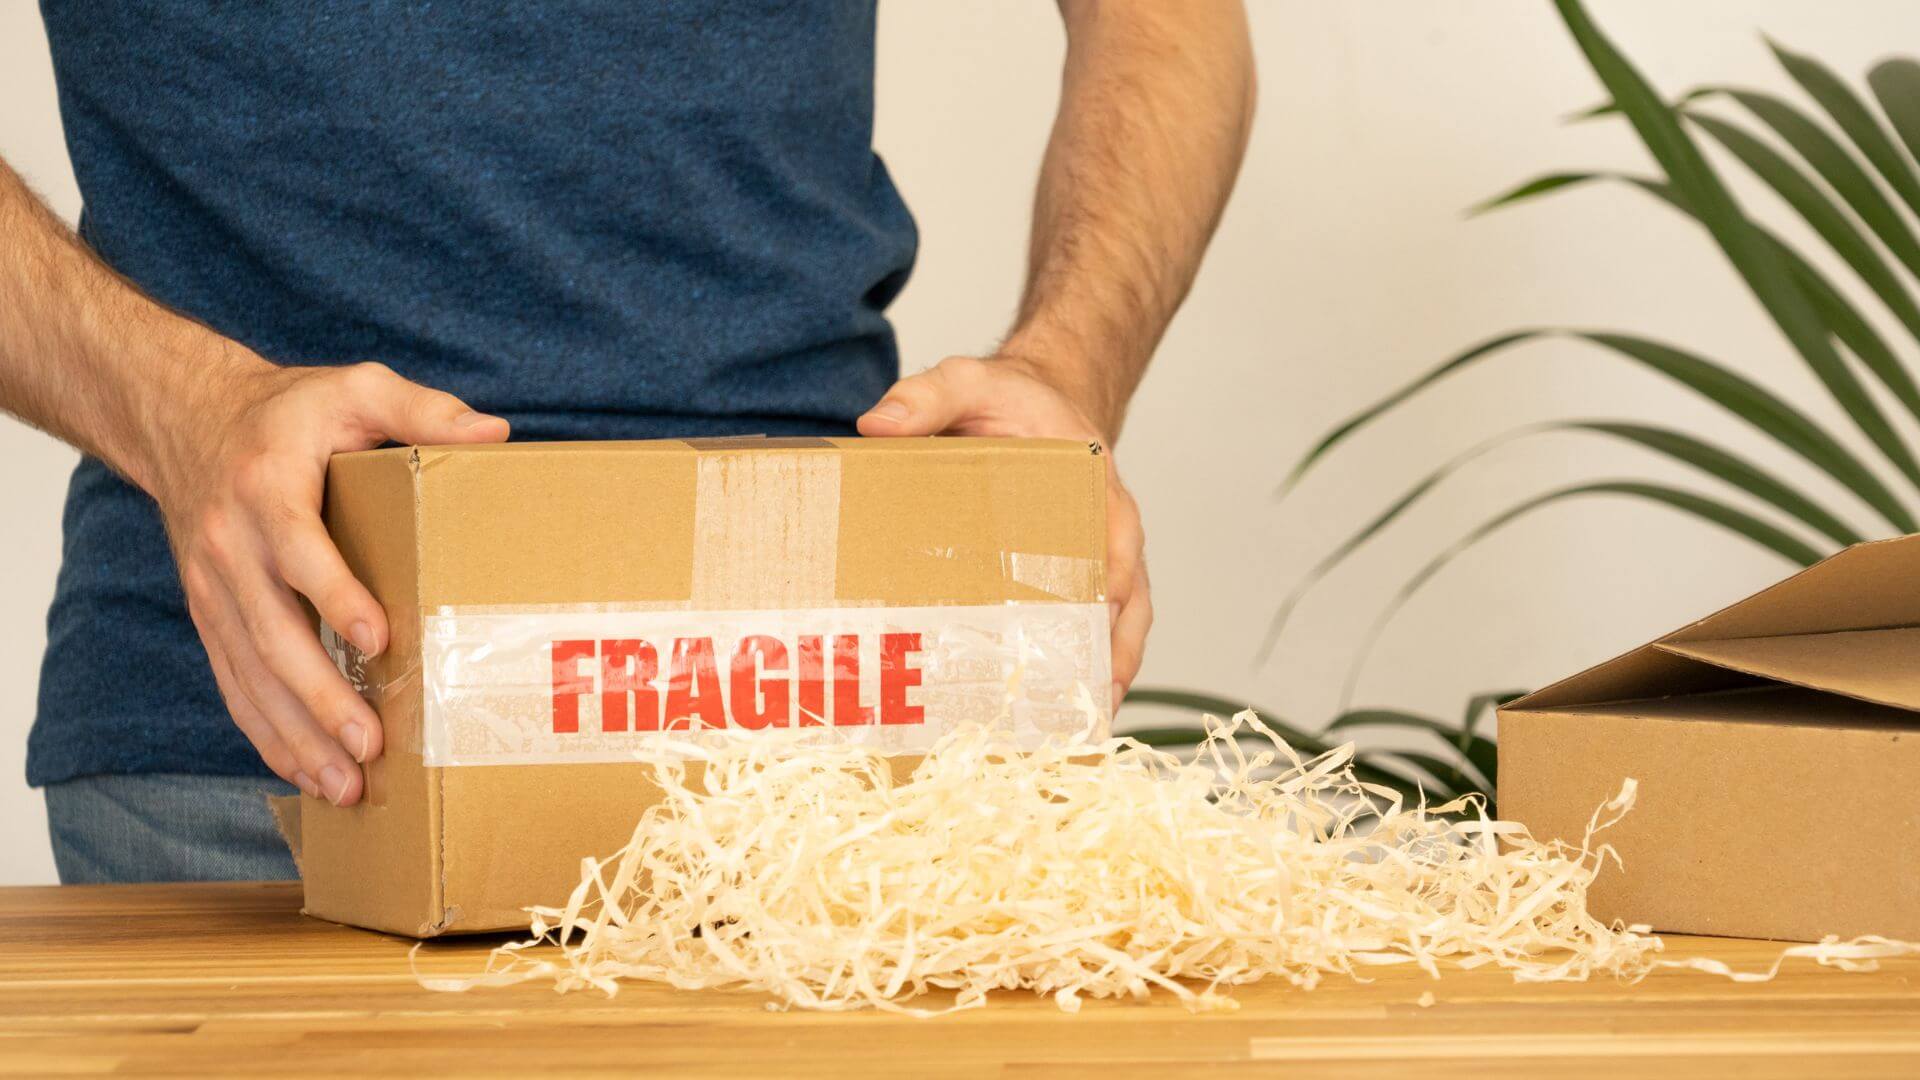 Package items. Fragile goods. Fragile Set mm2. Fragile. There are Breakable items in the Suitcase..